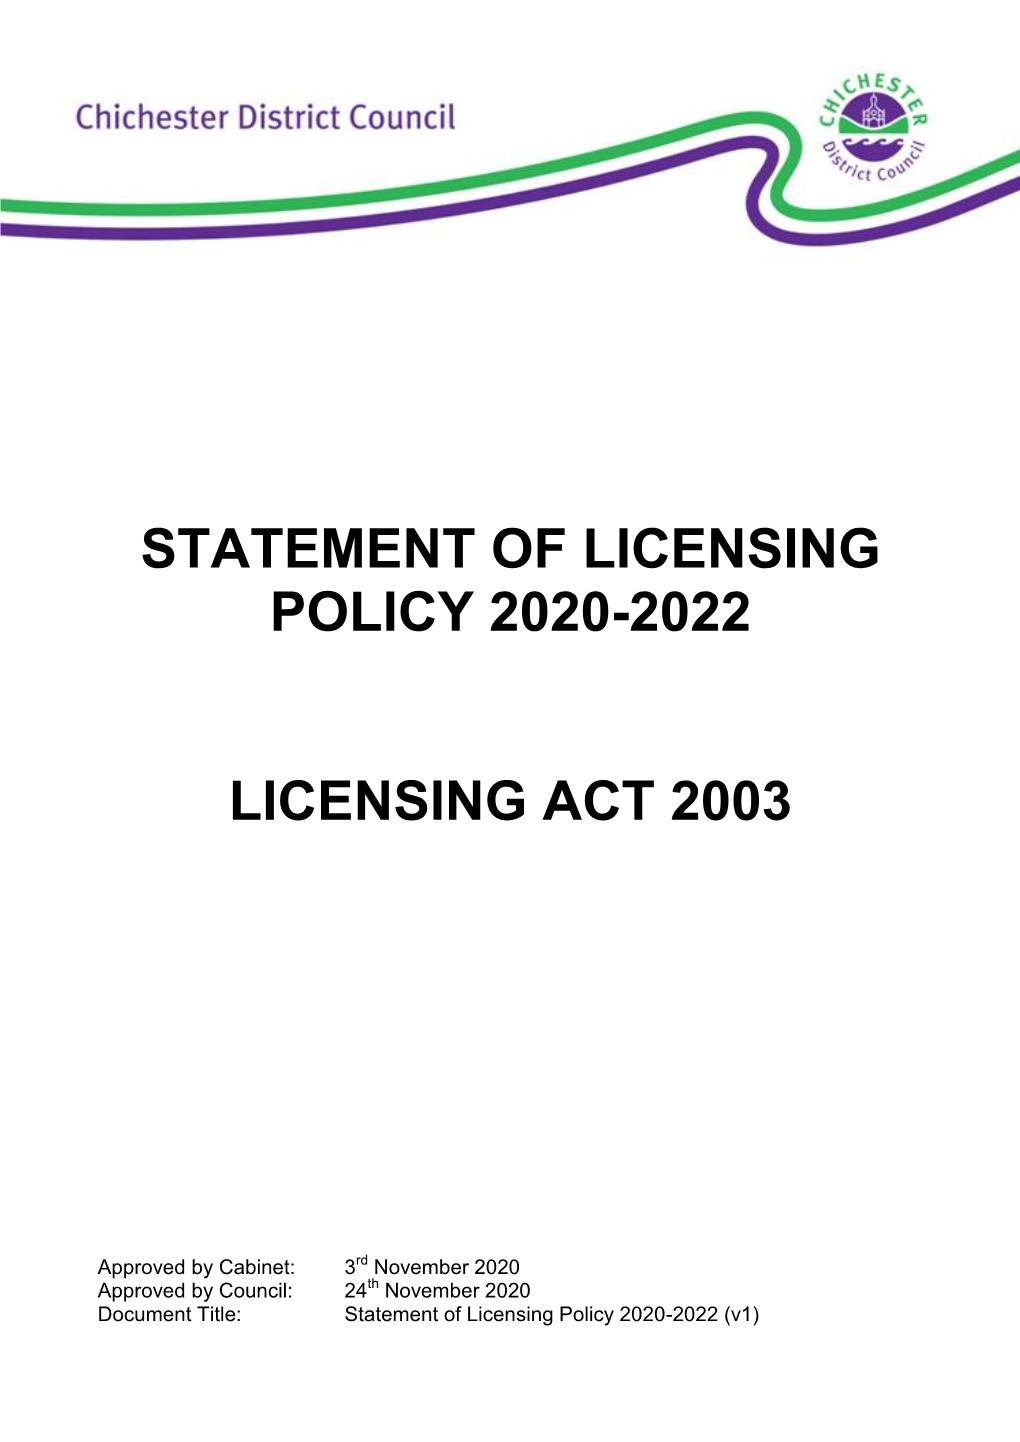 Statement of Licensing Policy 2020-2022